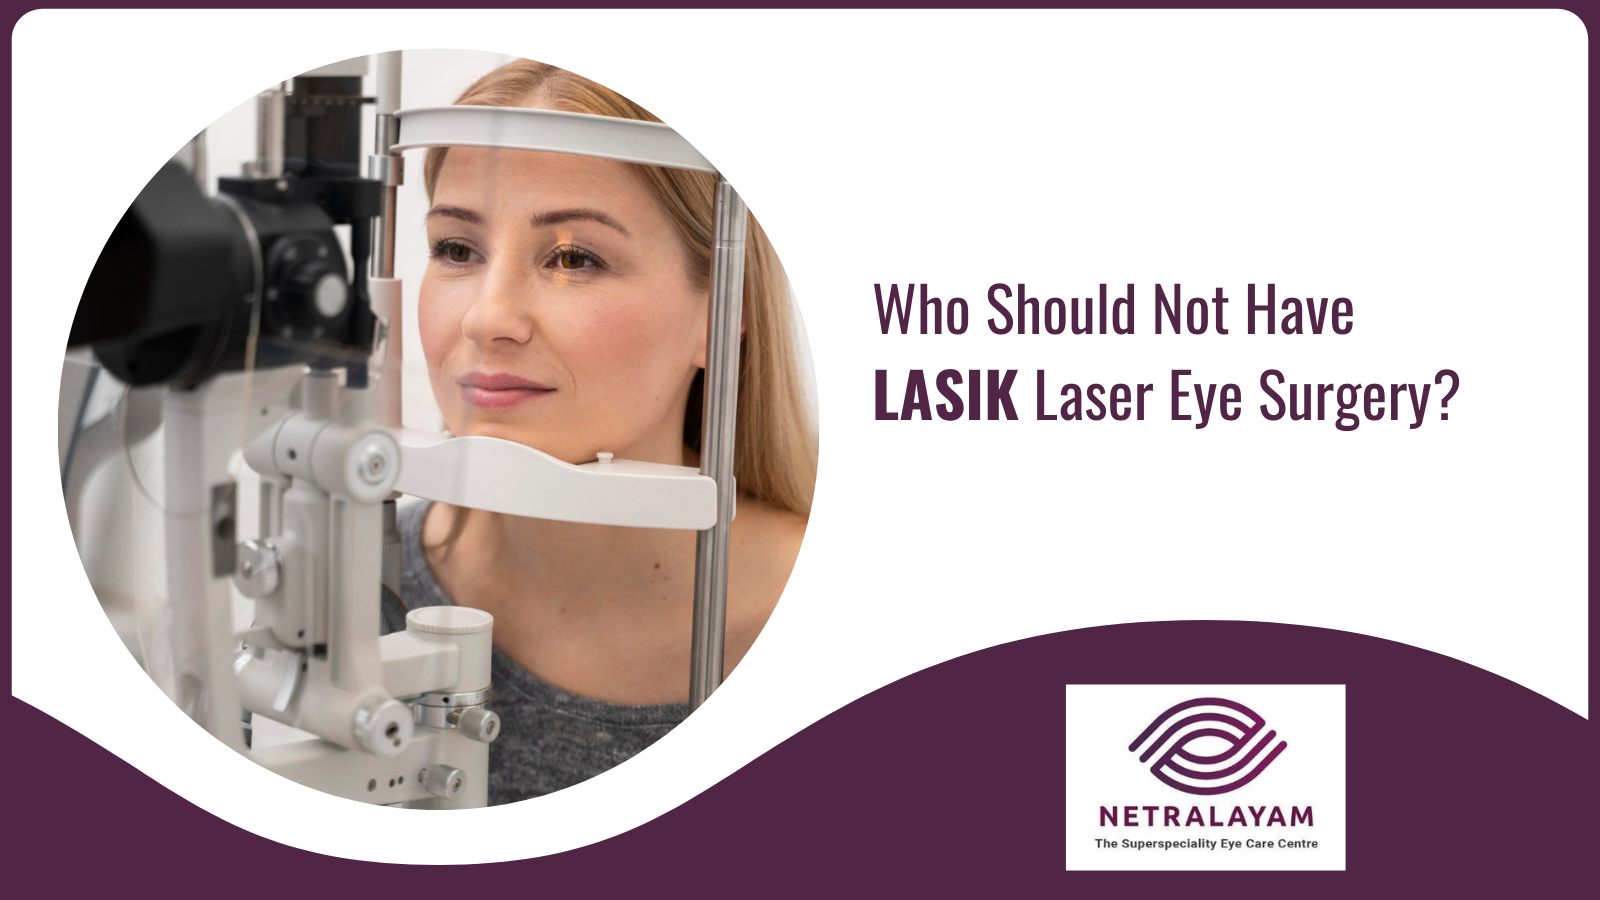 Who Should Not Have LASIK Laser Eye Surgery?